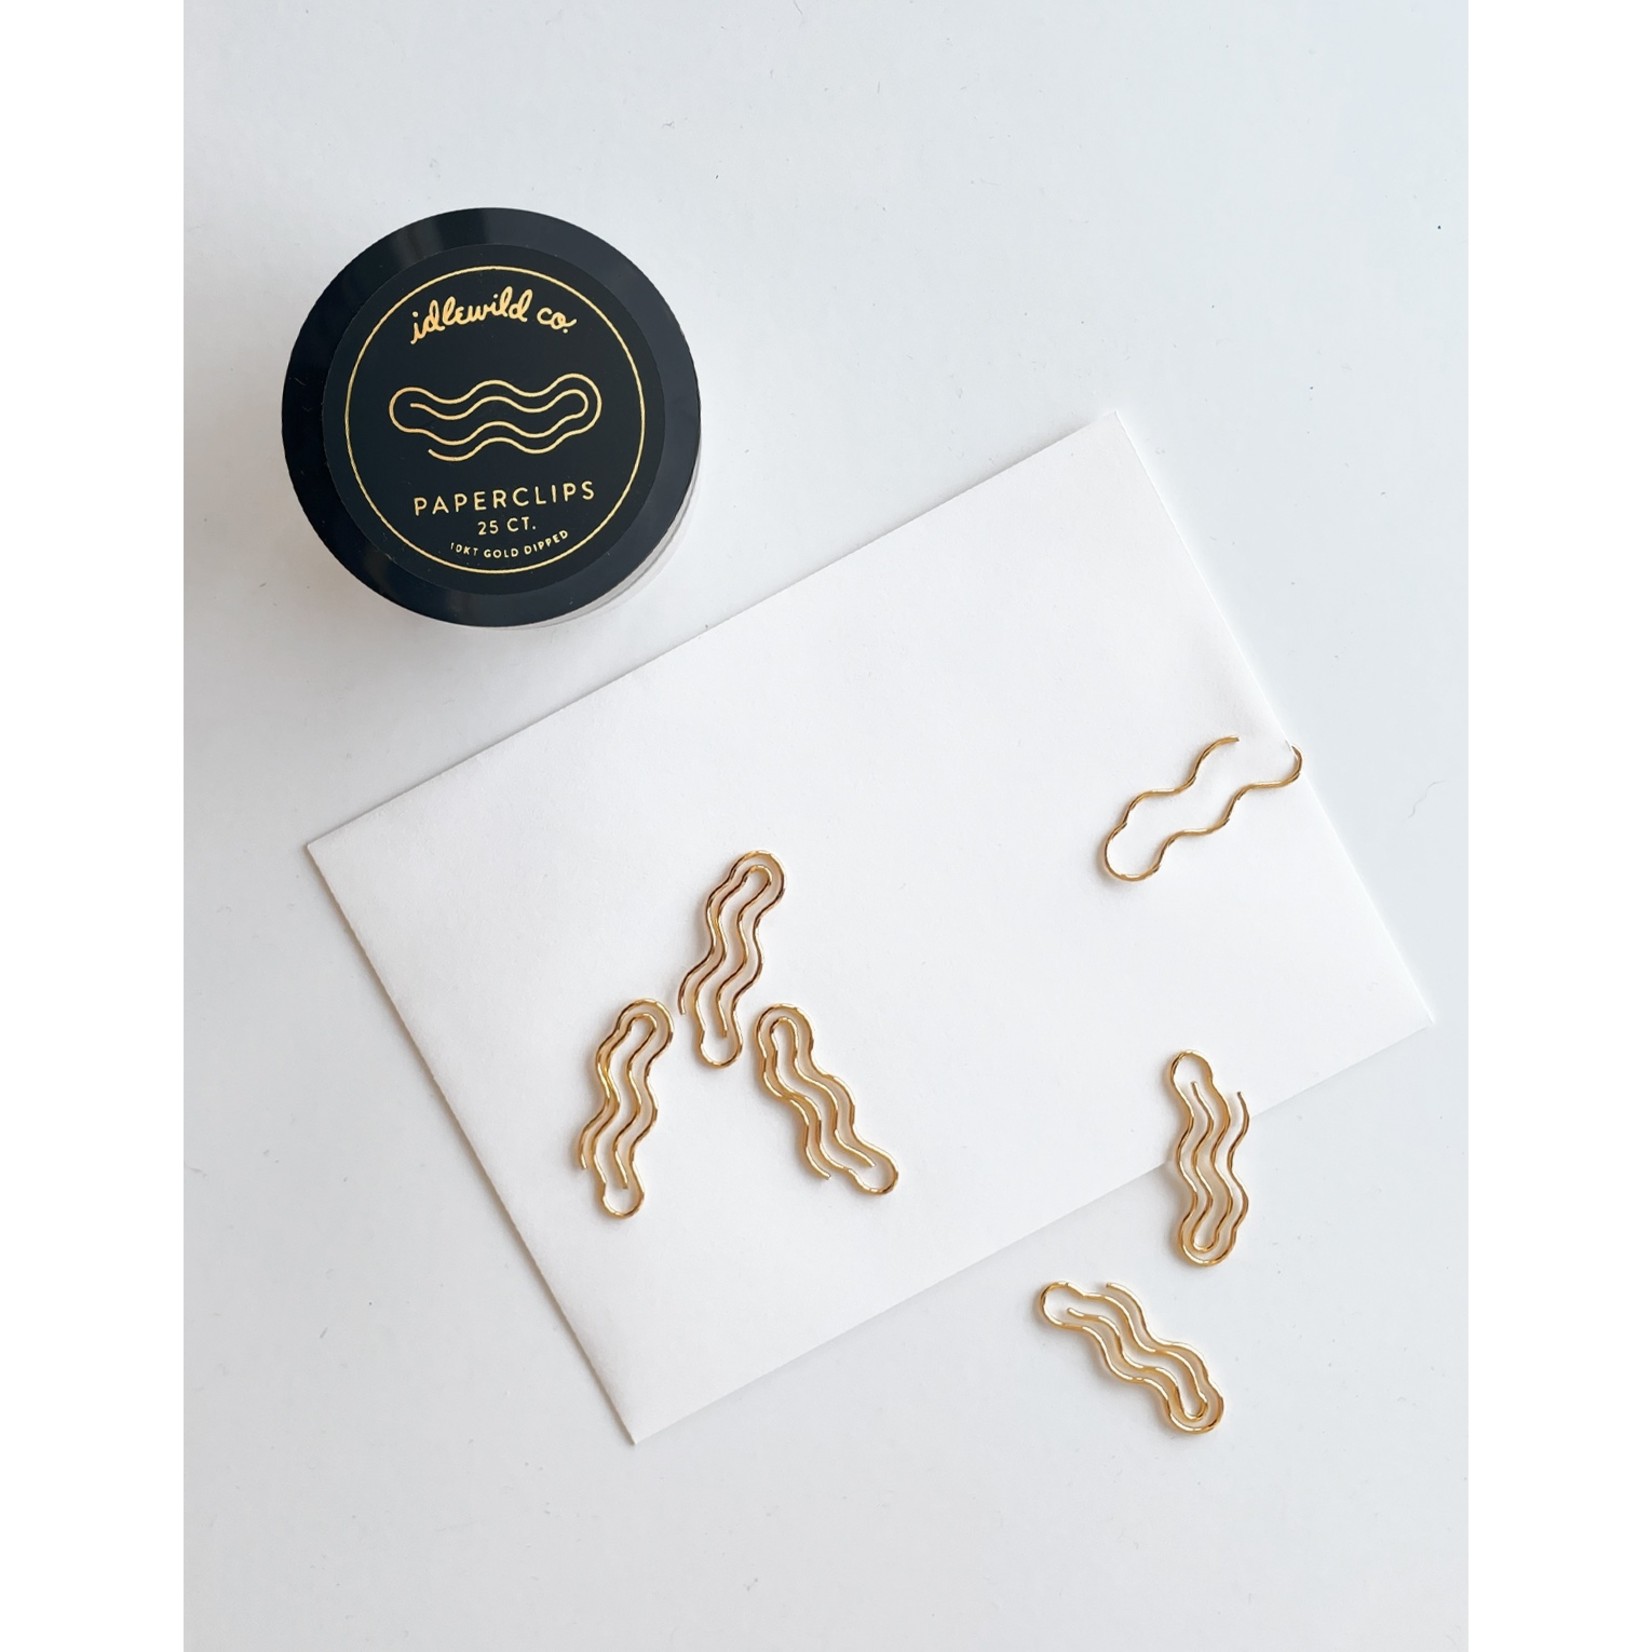 Idlewild Co. Wavy Gold Plated Paper Clips